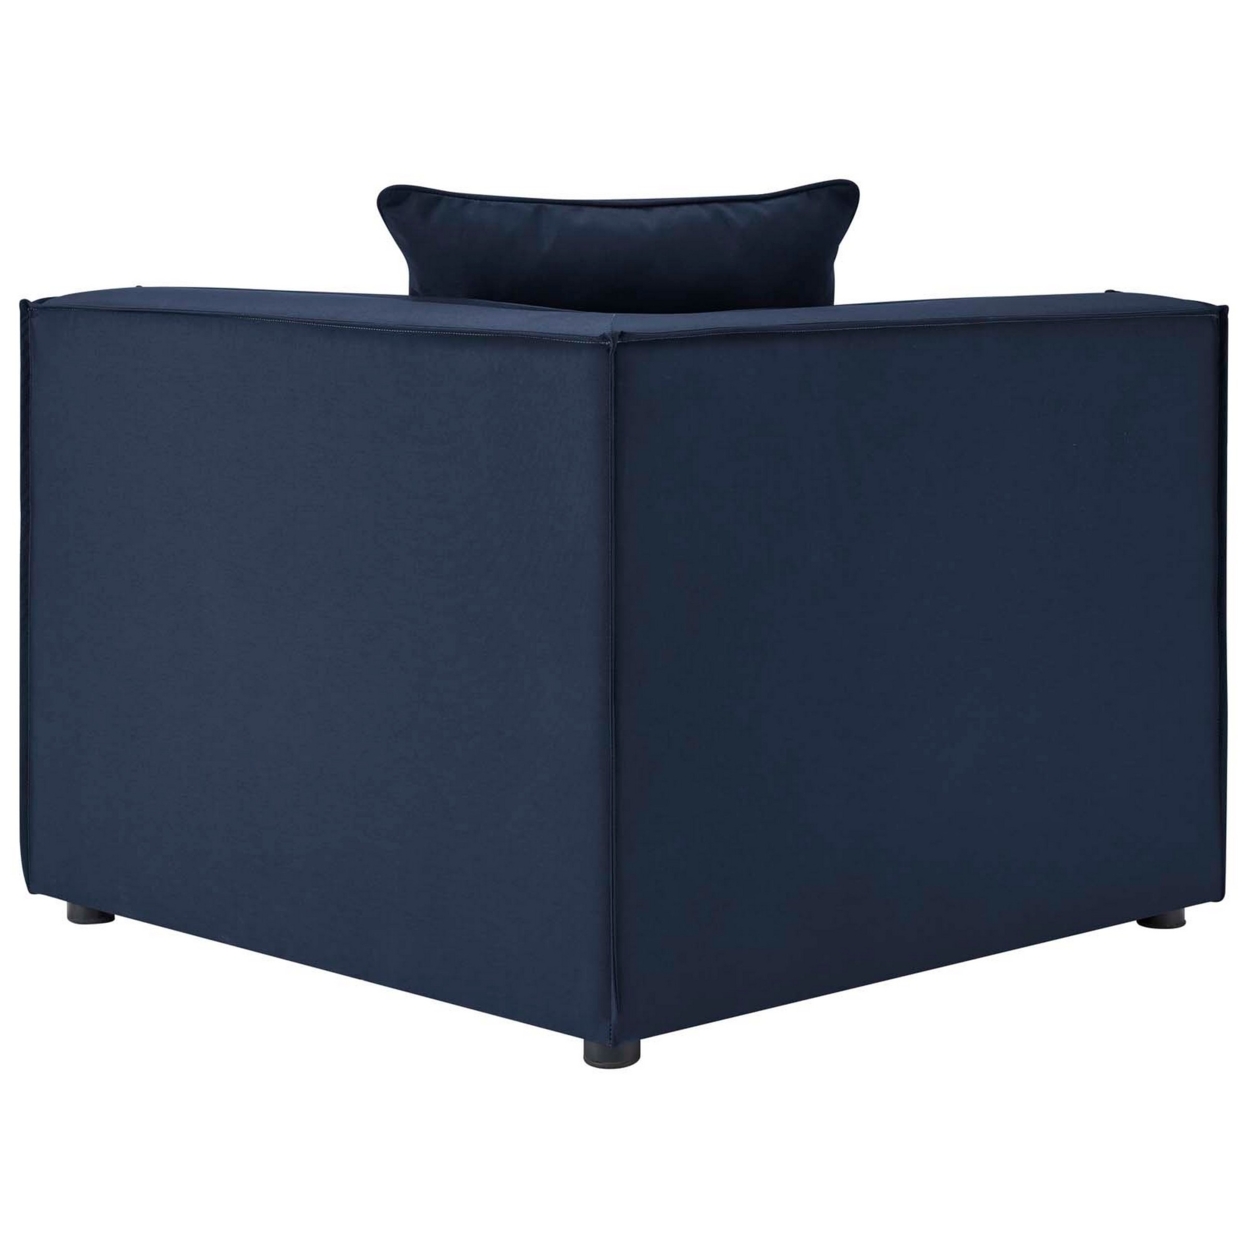 Saybrook Outdoor Patio Upholstered Sectional Sofa Corner Chair, Navy